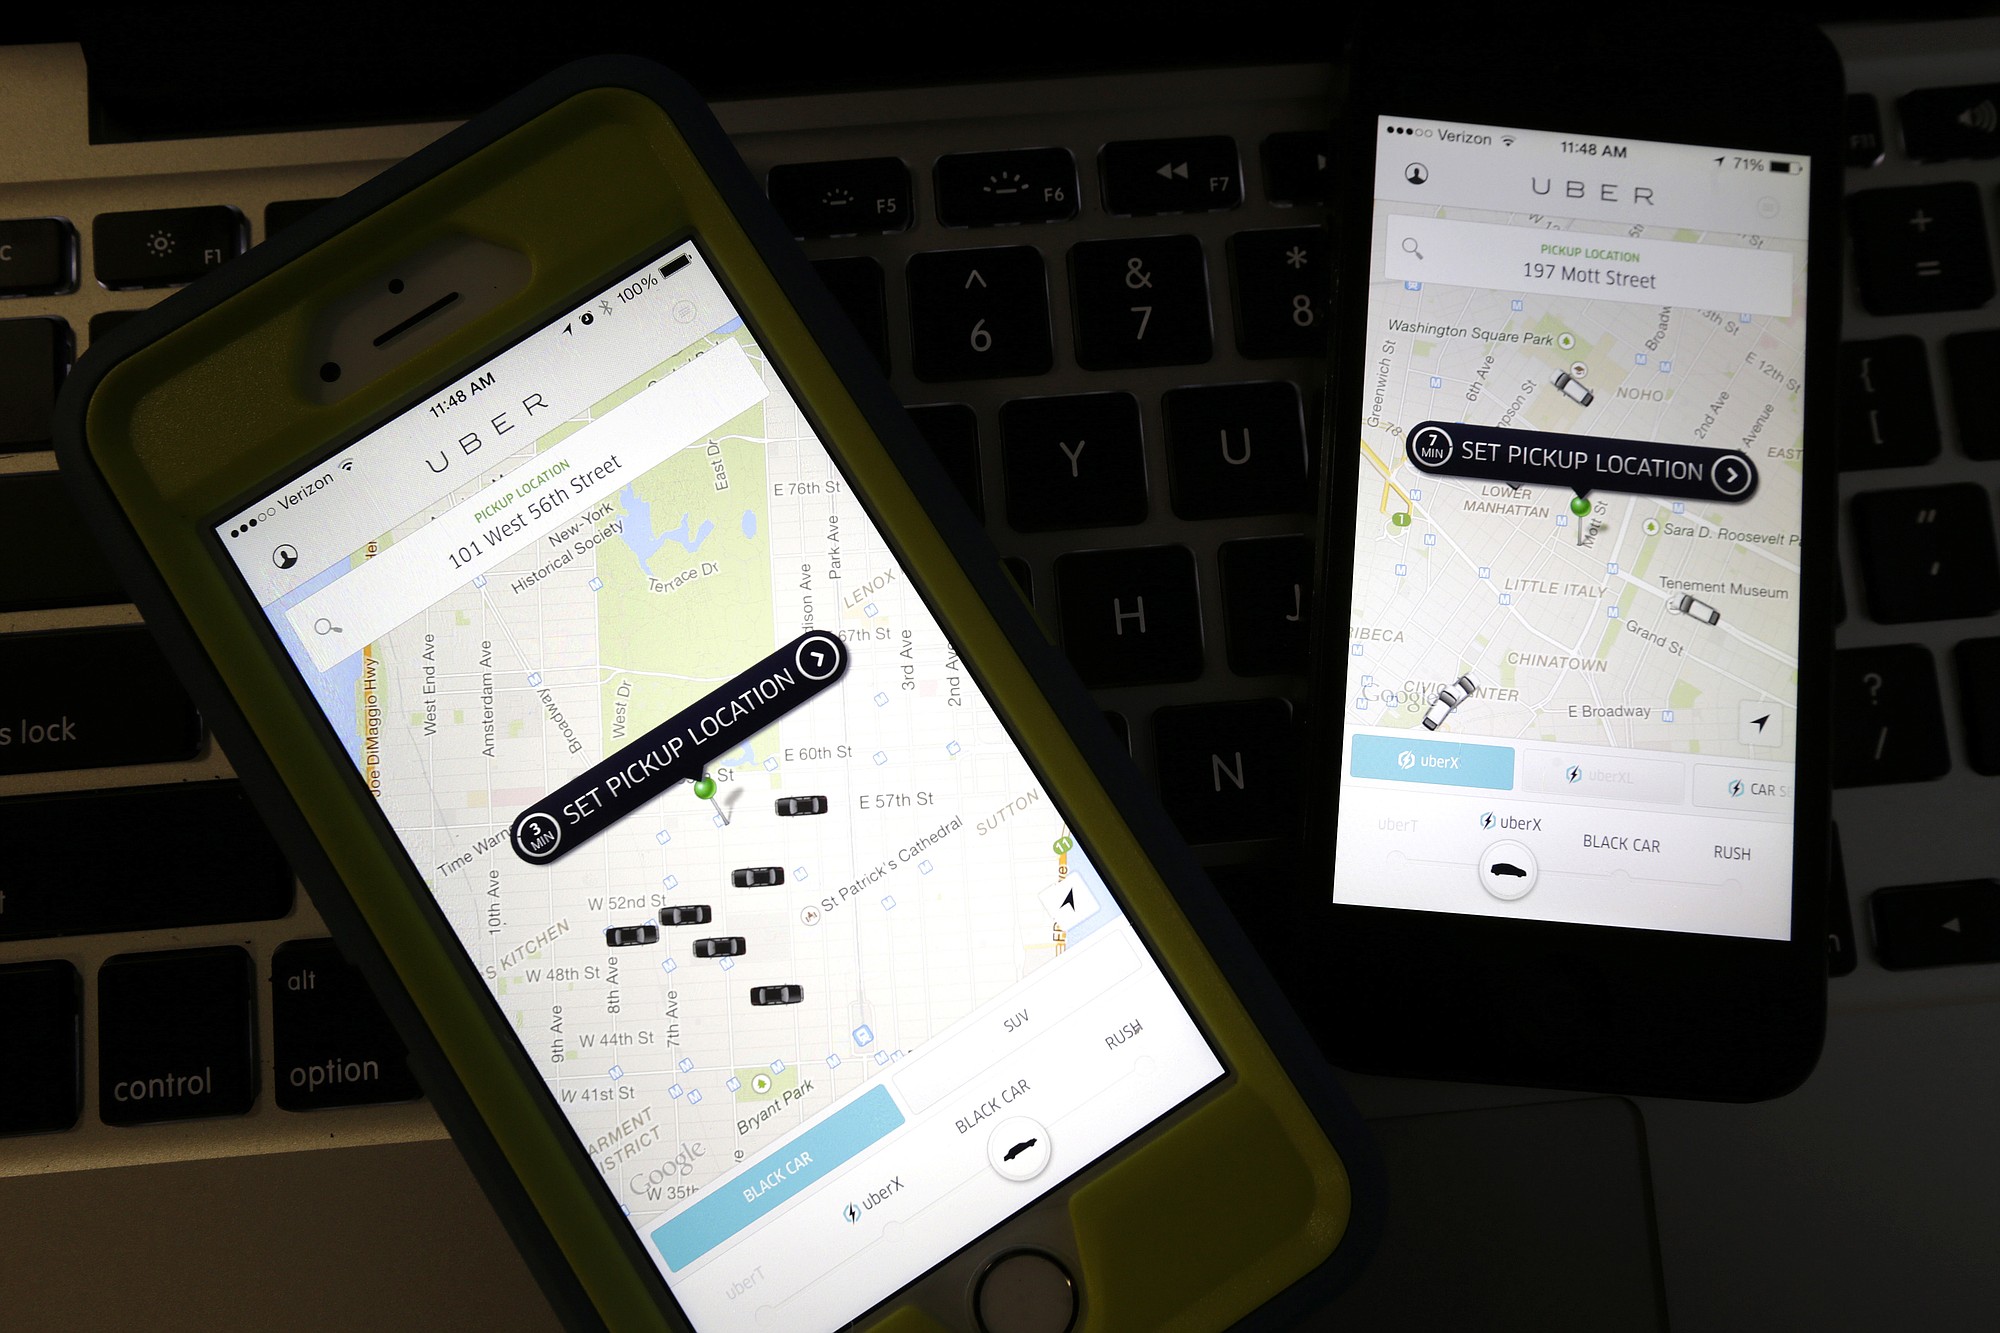 Associated Press files
Smartphones display Uber car availability in New York. With assault cases against their drivers in India and Chicago, ride-hailing app Uber is in for another public relations ordeal.